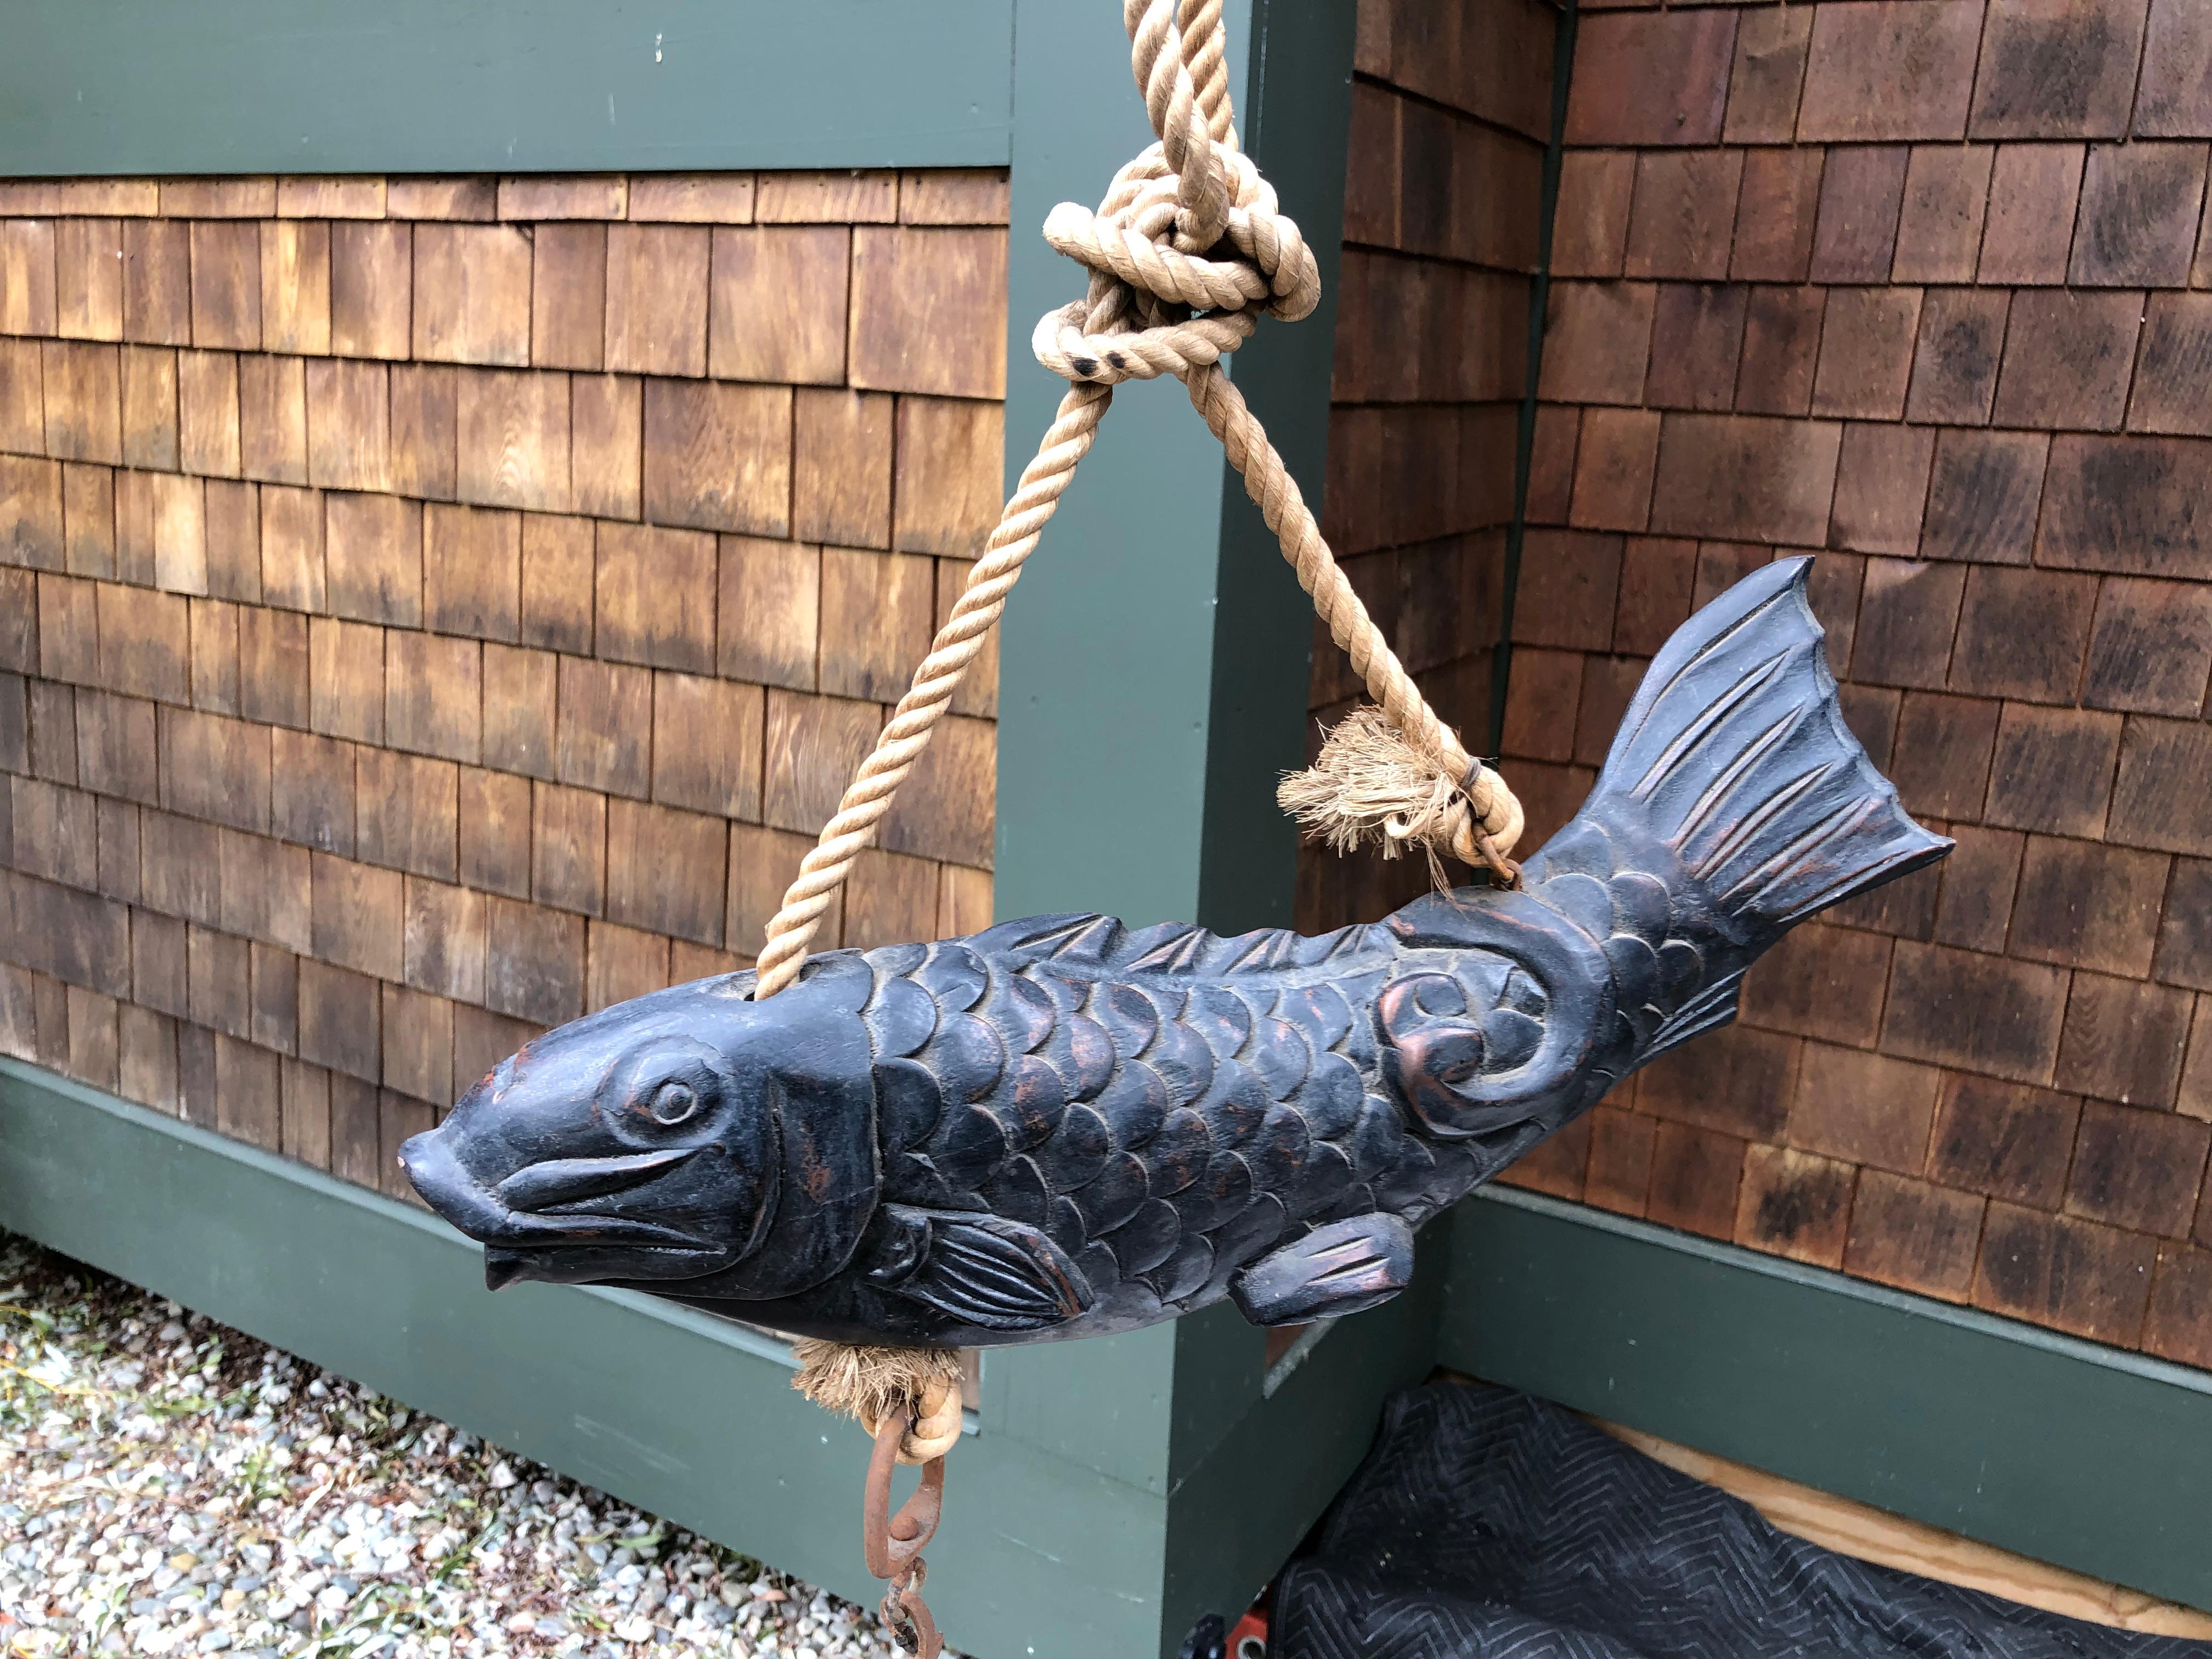 From our recent Japanese Acquisitions Travels- a large catch.

A large scale fine old Japanese 19th century hand carved wooden KOI fish symbolic of prosperity, perseverance and good fortune. This big fish holds the round ball like wish granting